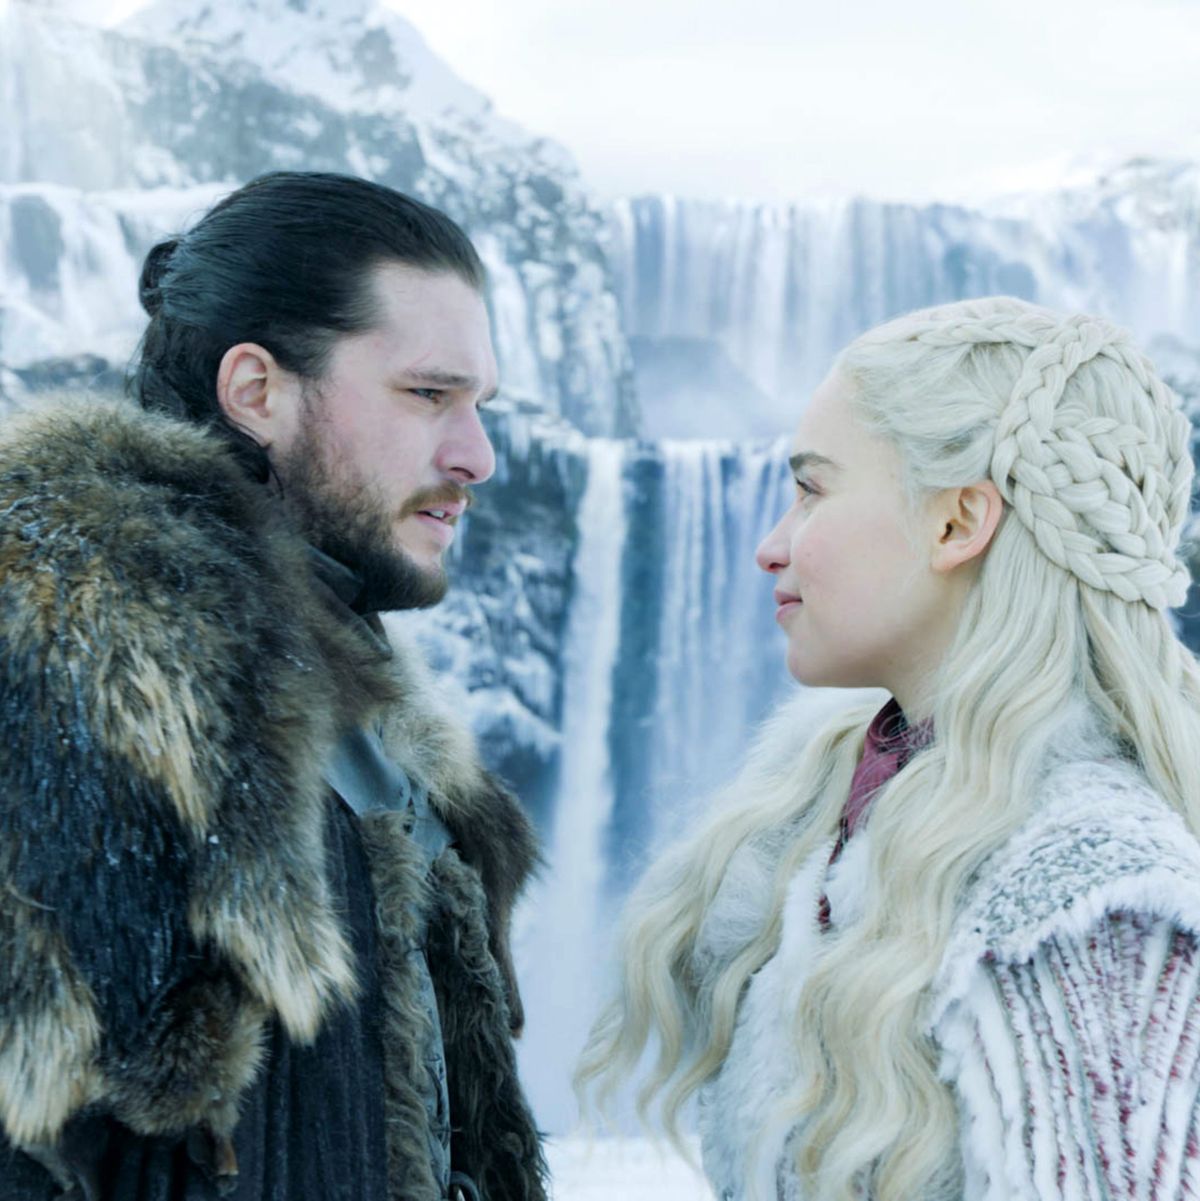 Incest Dad Pregent Daughter - Game of Thrones: The Season 8 Premiere Was Like The Bachelor